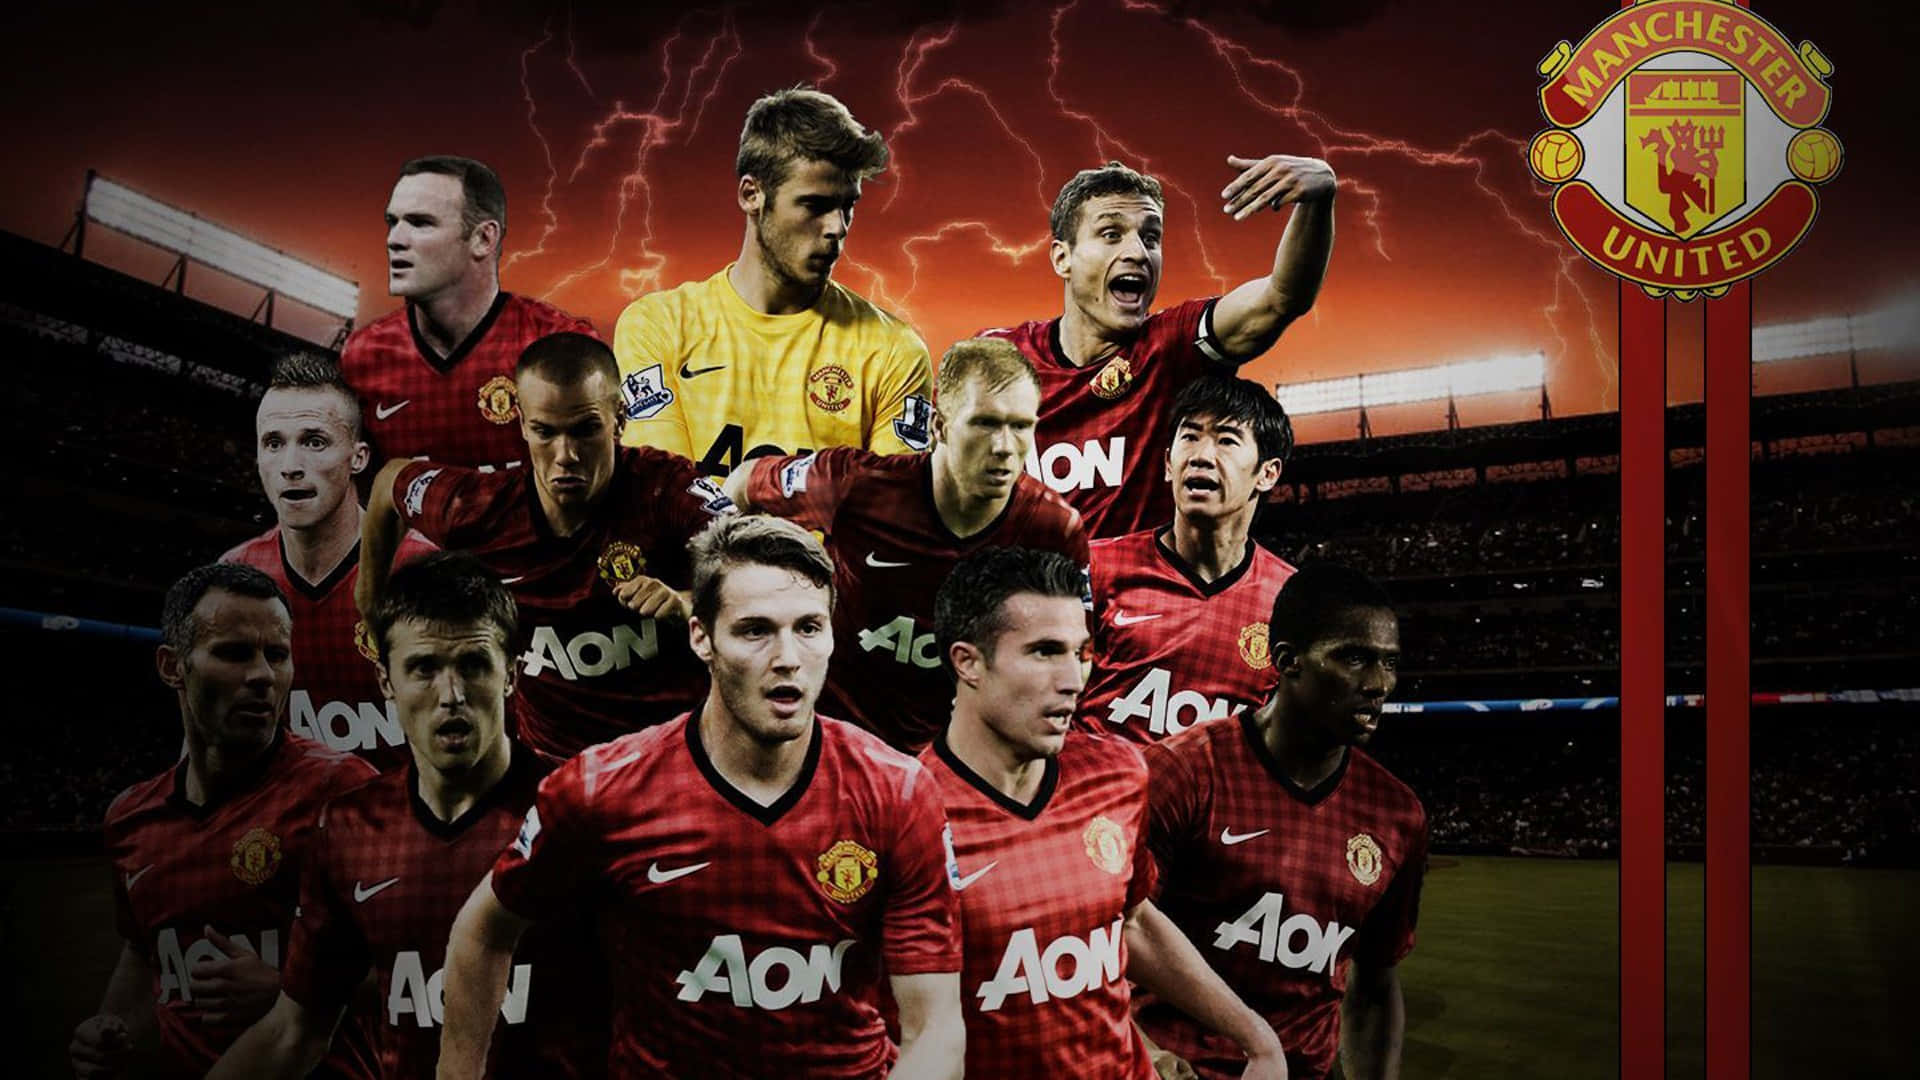 The Manchester United Team - Ready for Premier League Title Wallpaper